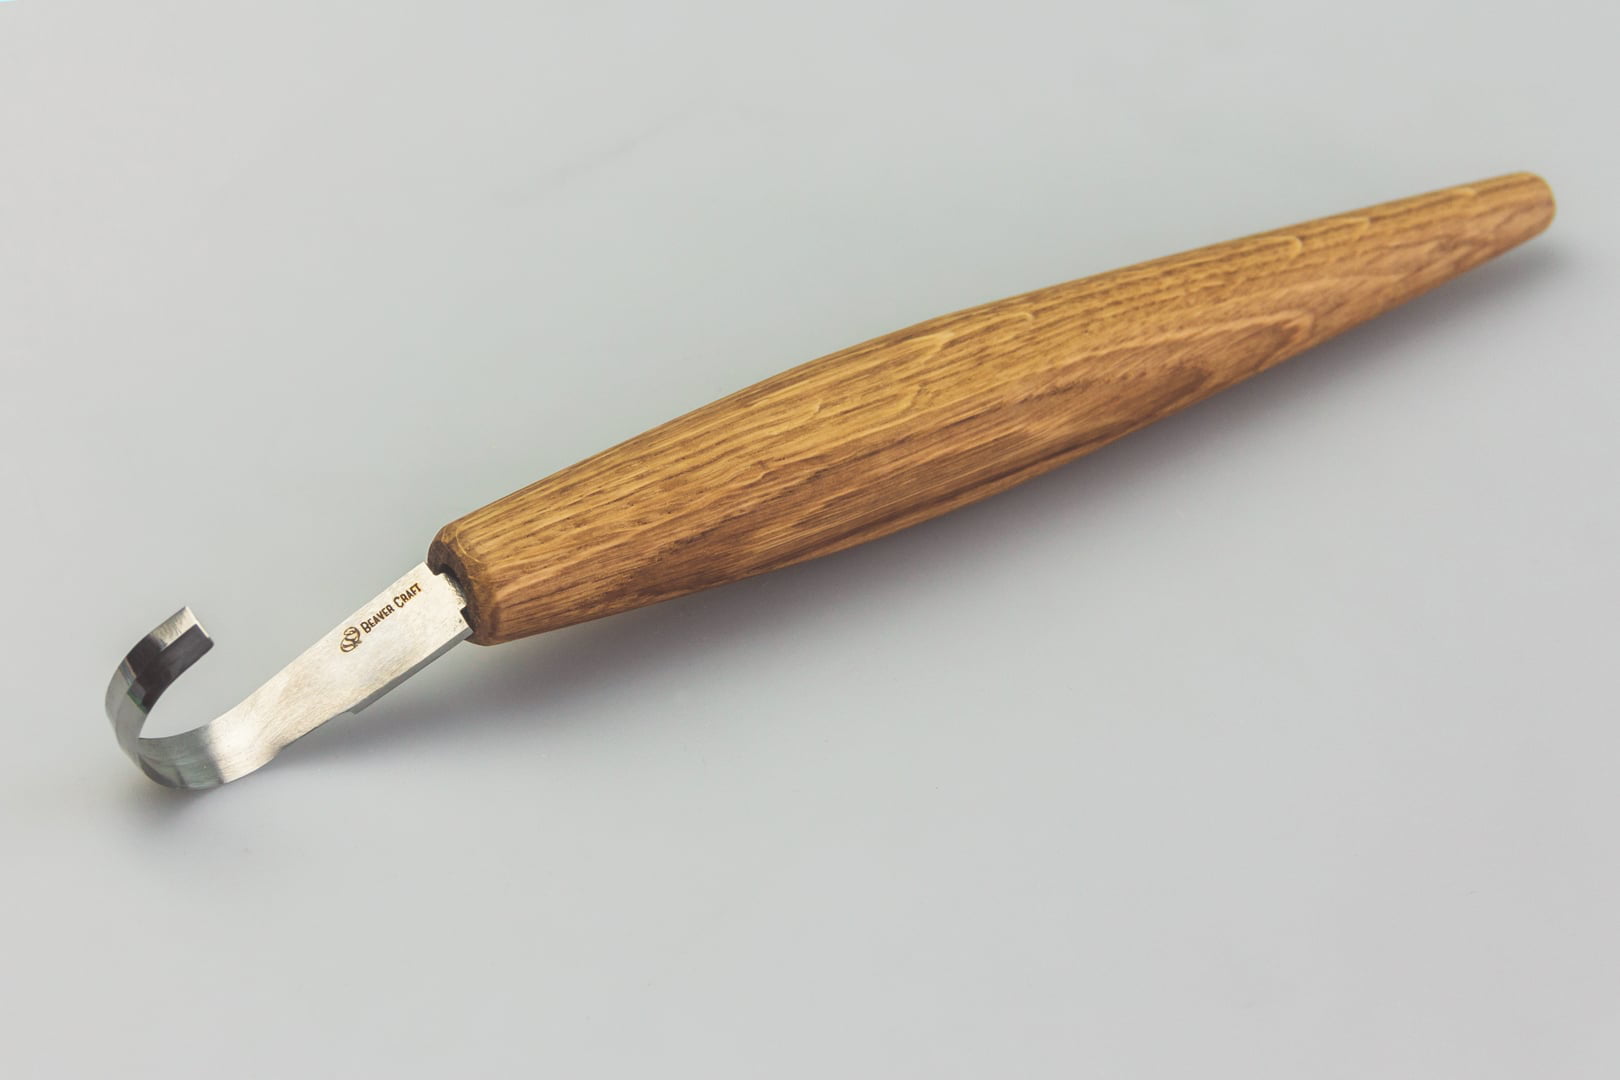 Beaver Craft C13 - Whittling Knife - The Spoon Crank